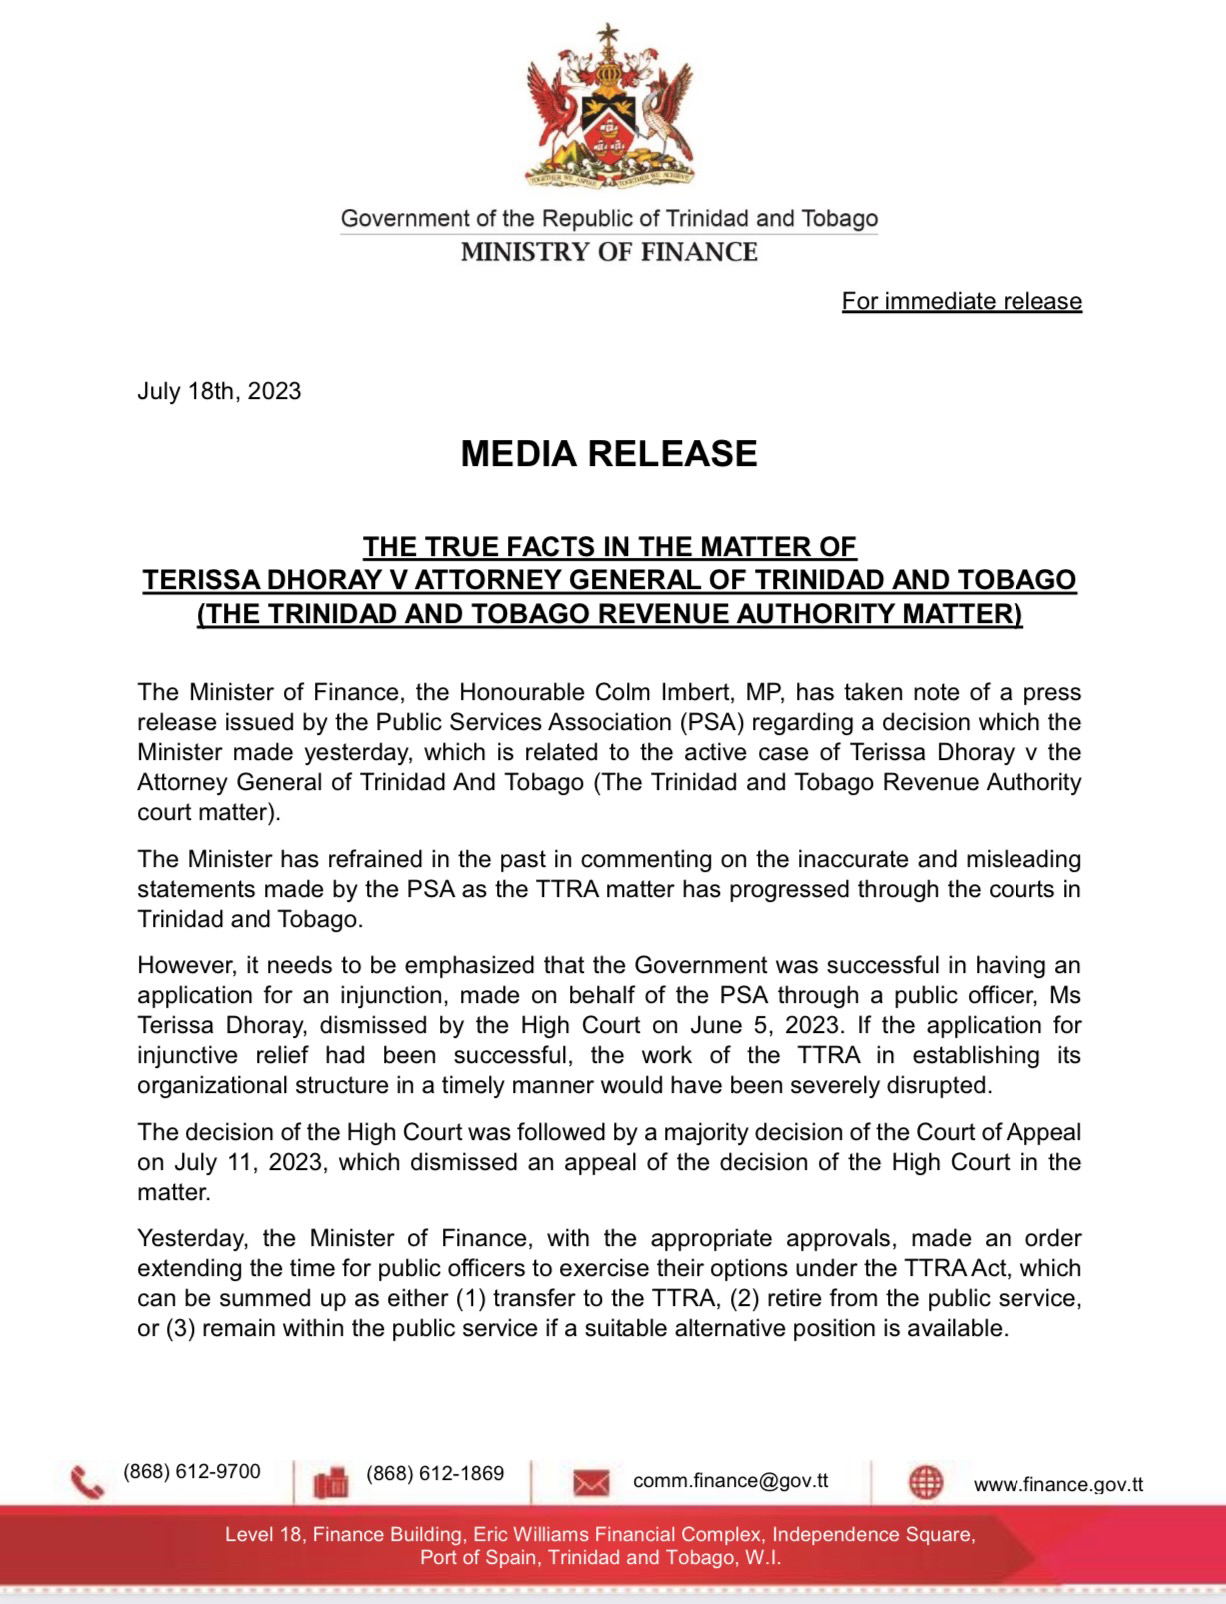 THE TRUE FACTS IN THE MATTER OF TERISSA DHORAY V ATTORNEY GENERAL OF TRINIDAD AND TOBAGO